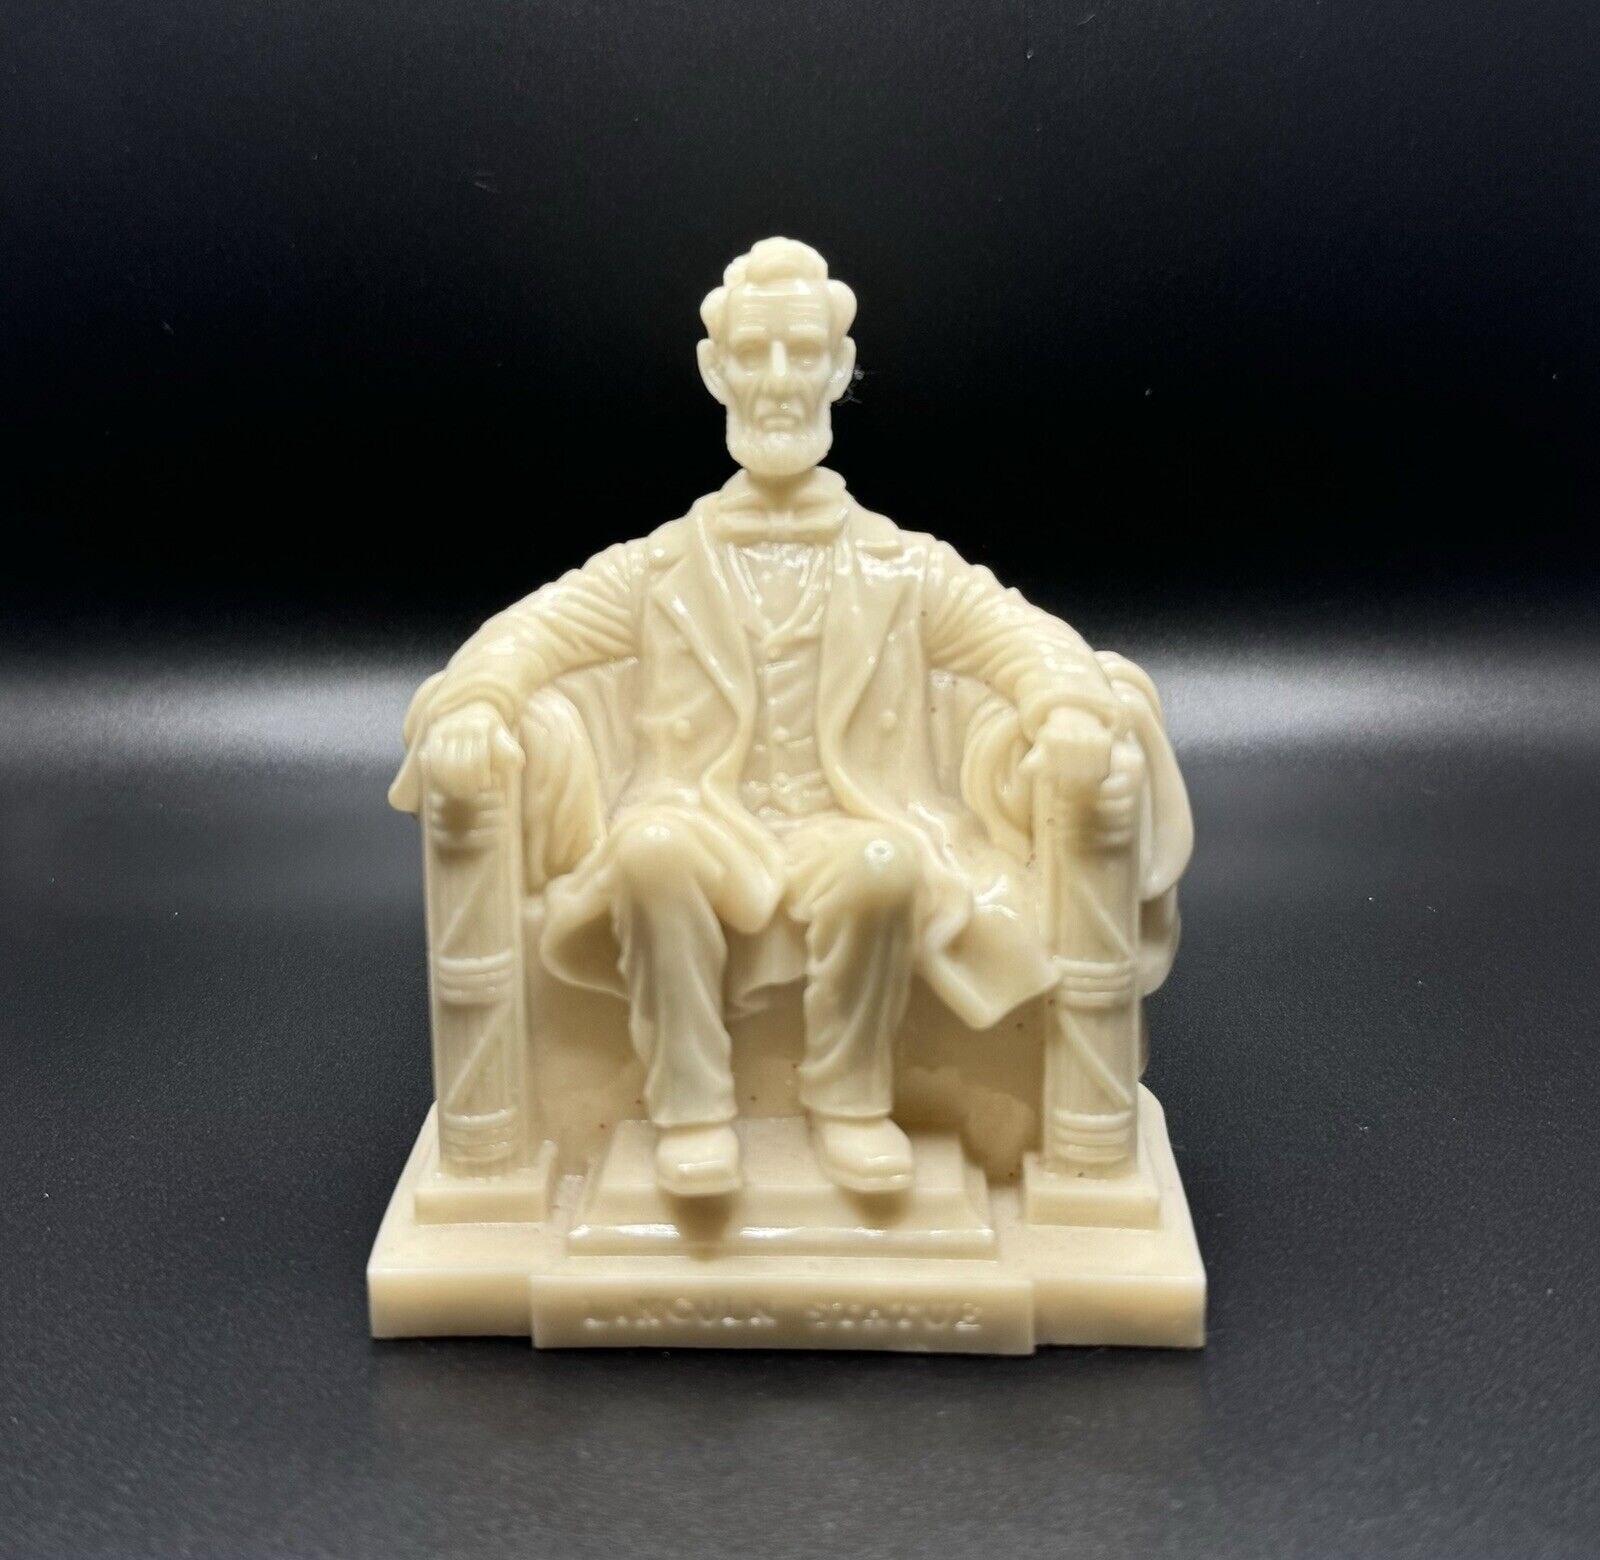 Vintage abraham lincoln collectible